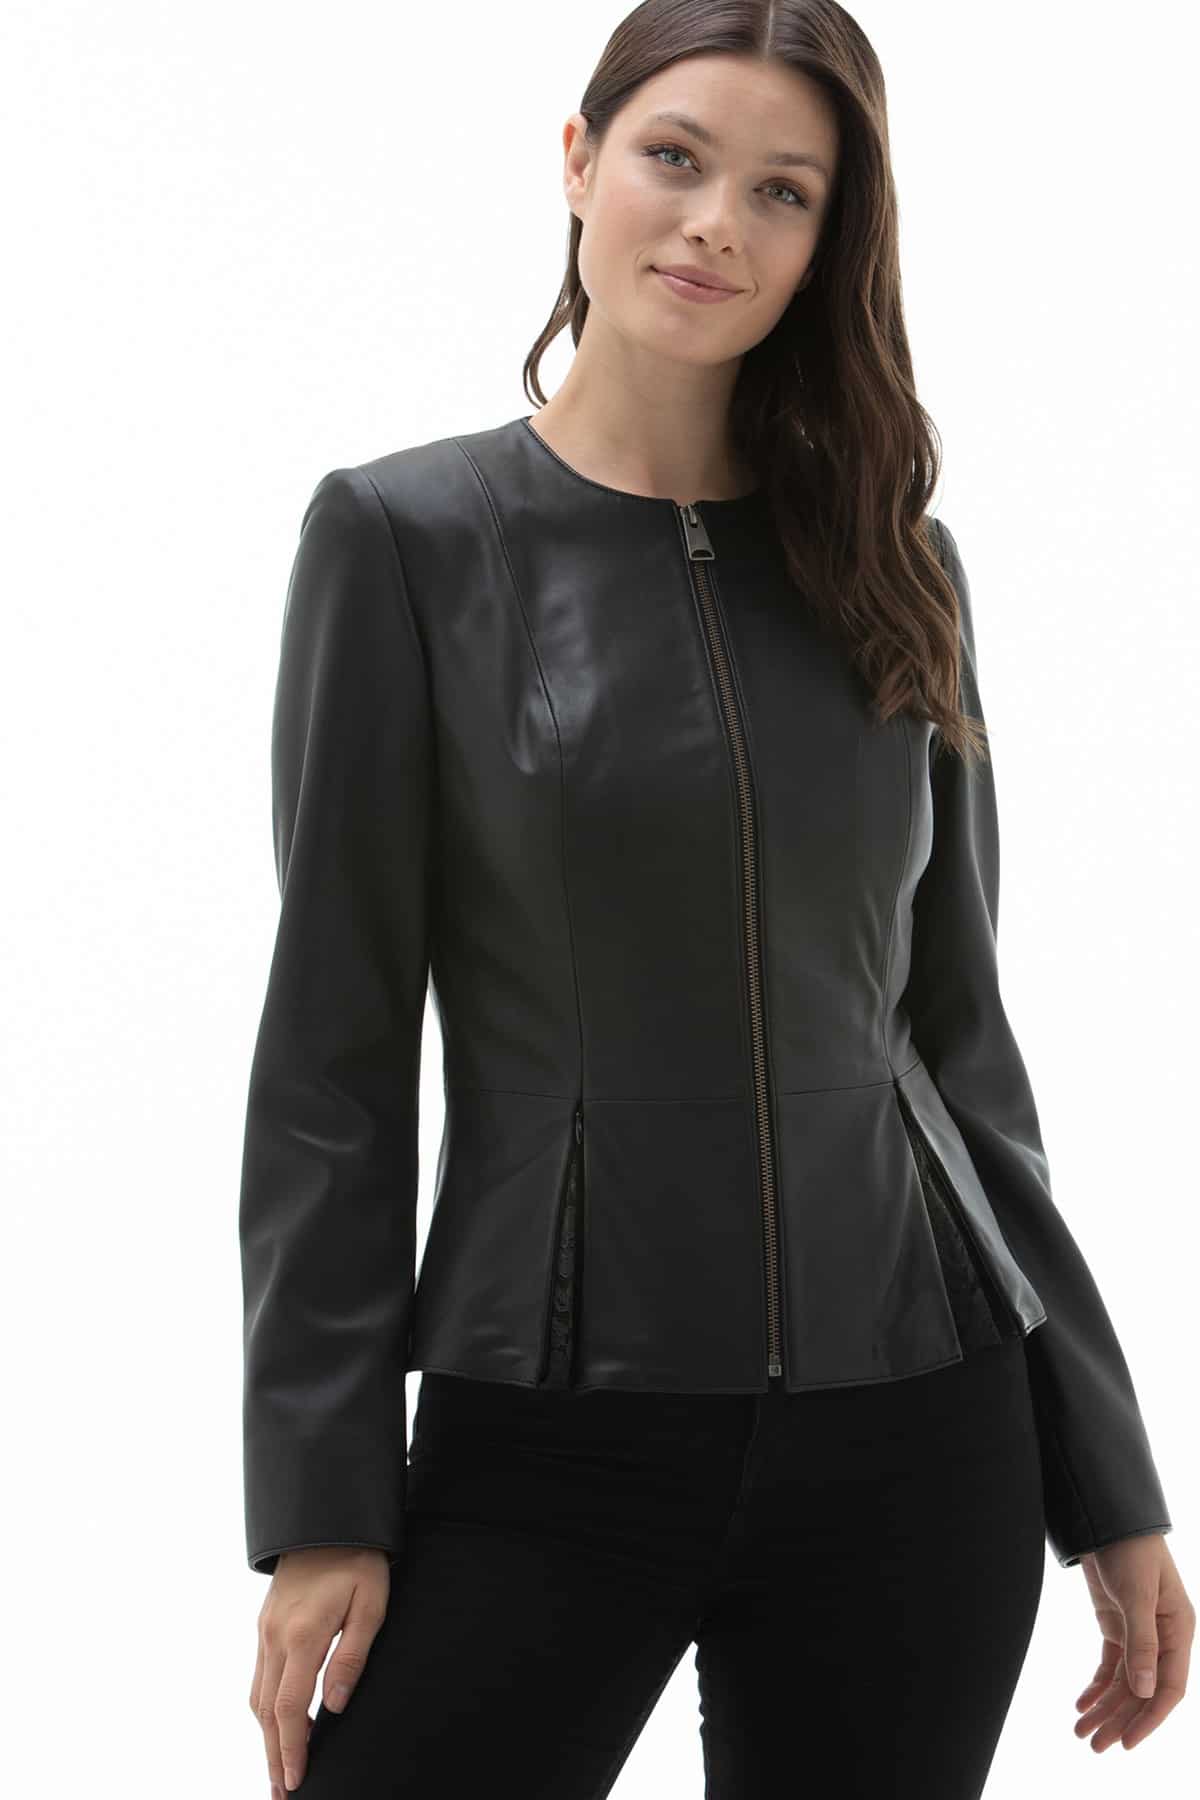 Women's 100 % Real Black Leather Jacket